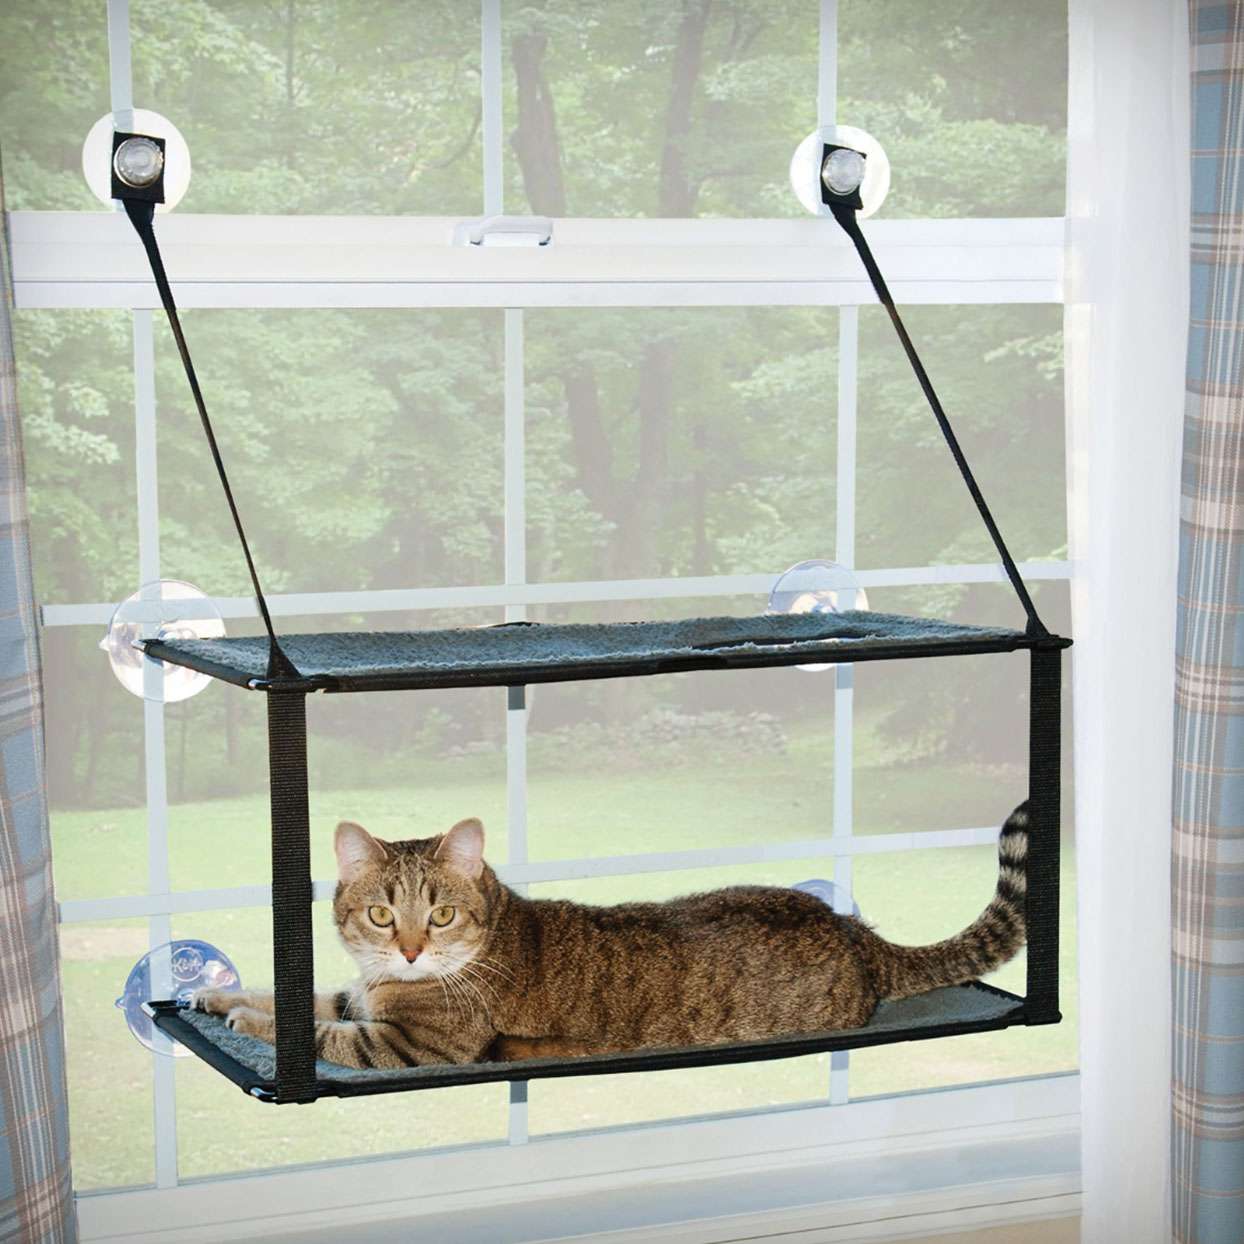 K&H Pet Products EZ Mount Double Stack Kitty Sill Cat Window Perch